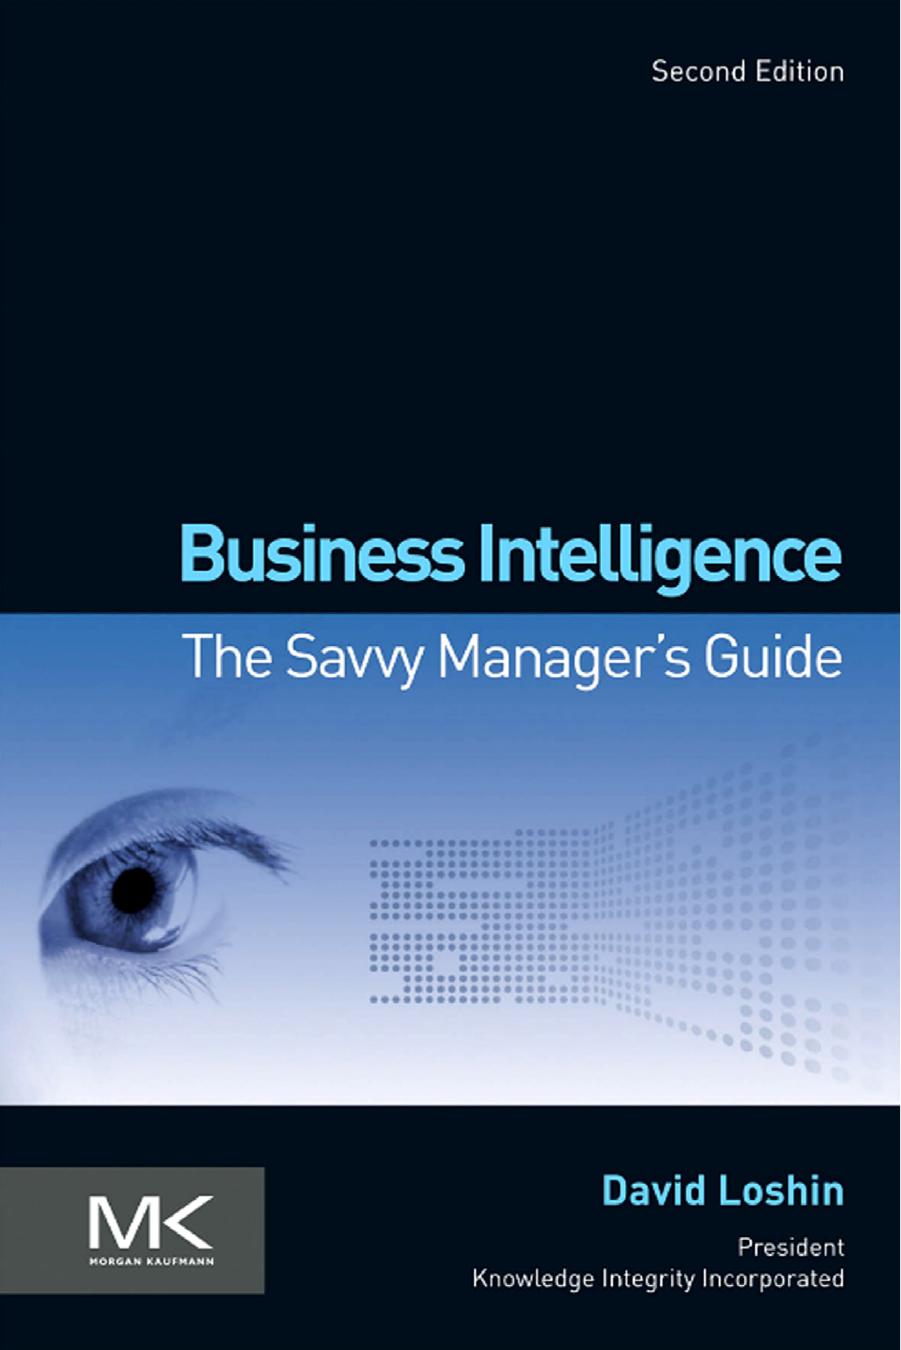 Business Intelligence: The Savvy Manager's Guide by David Loshin